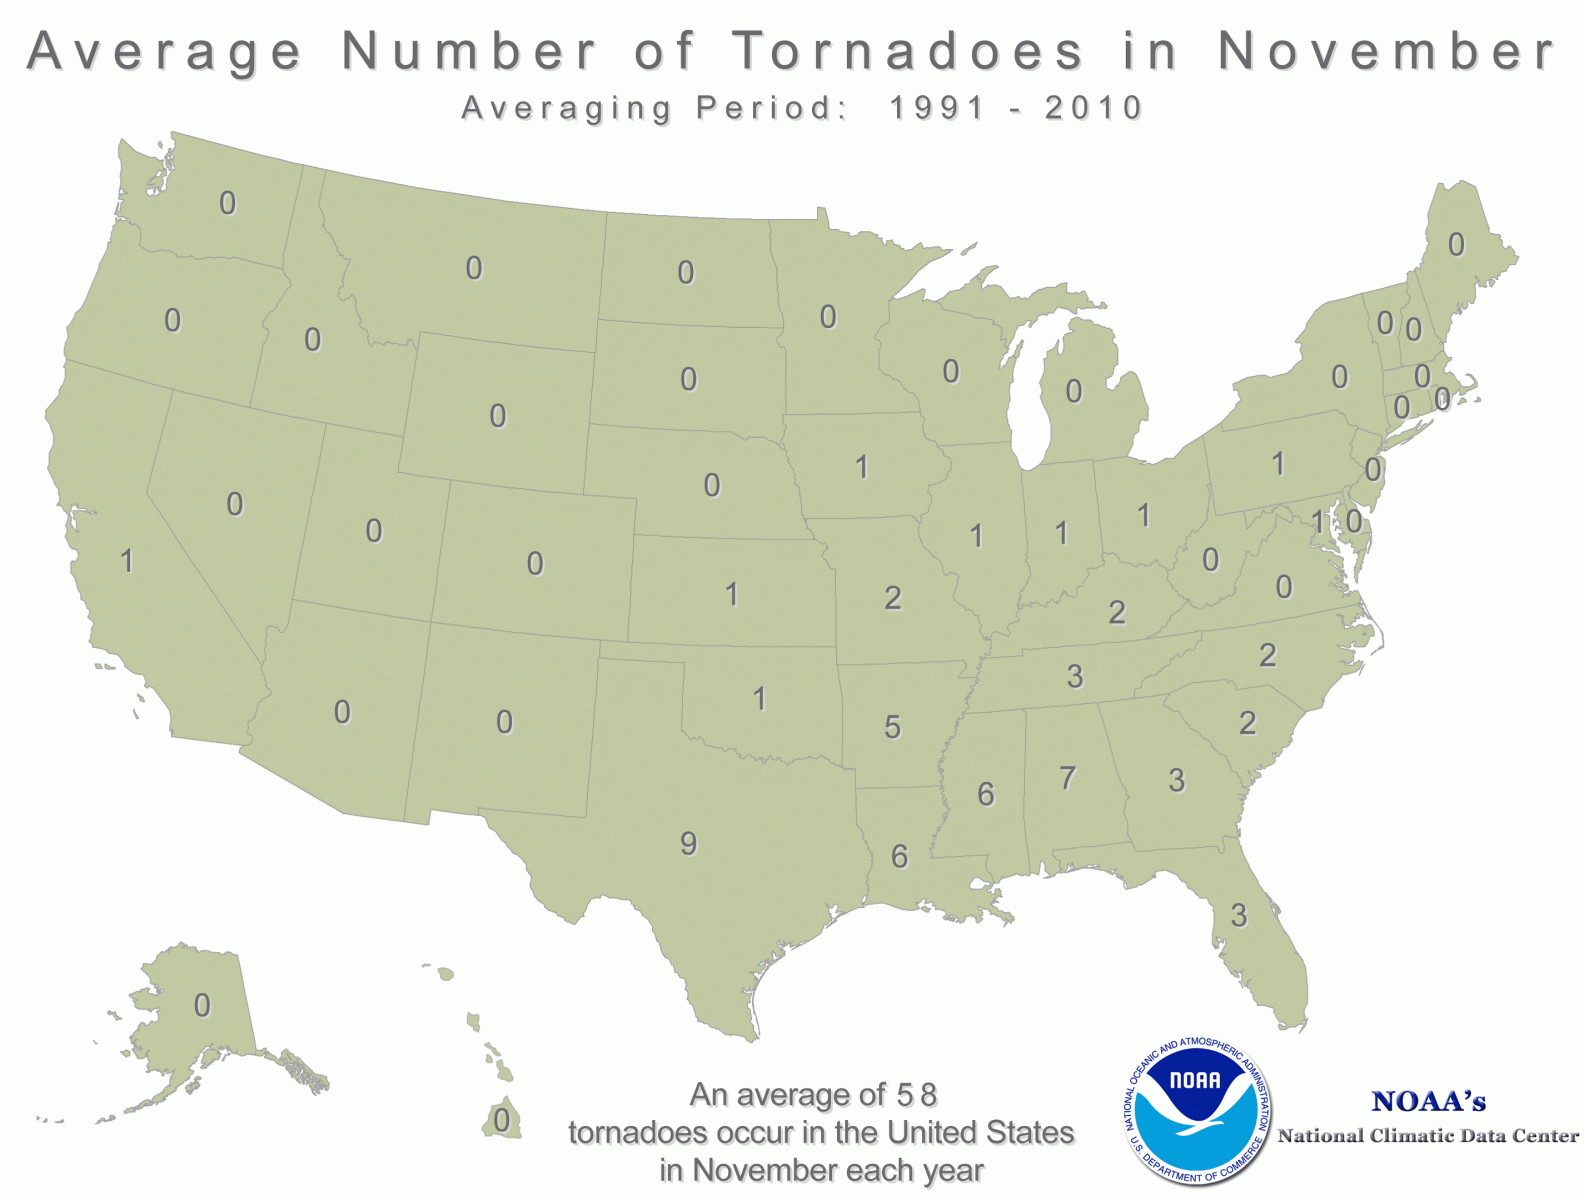 Image showing average number of tornadoes in November by state